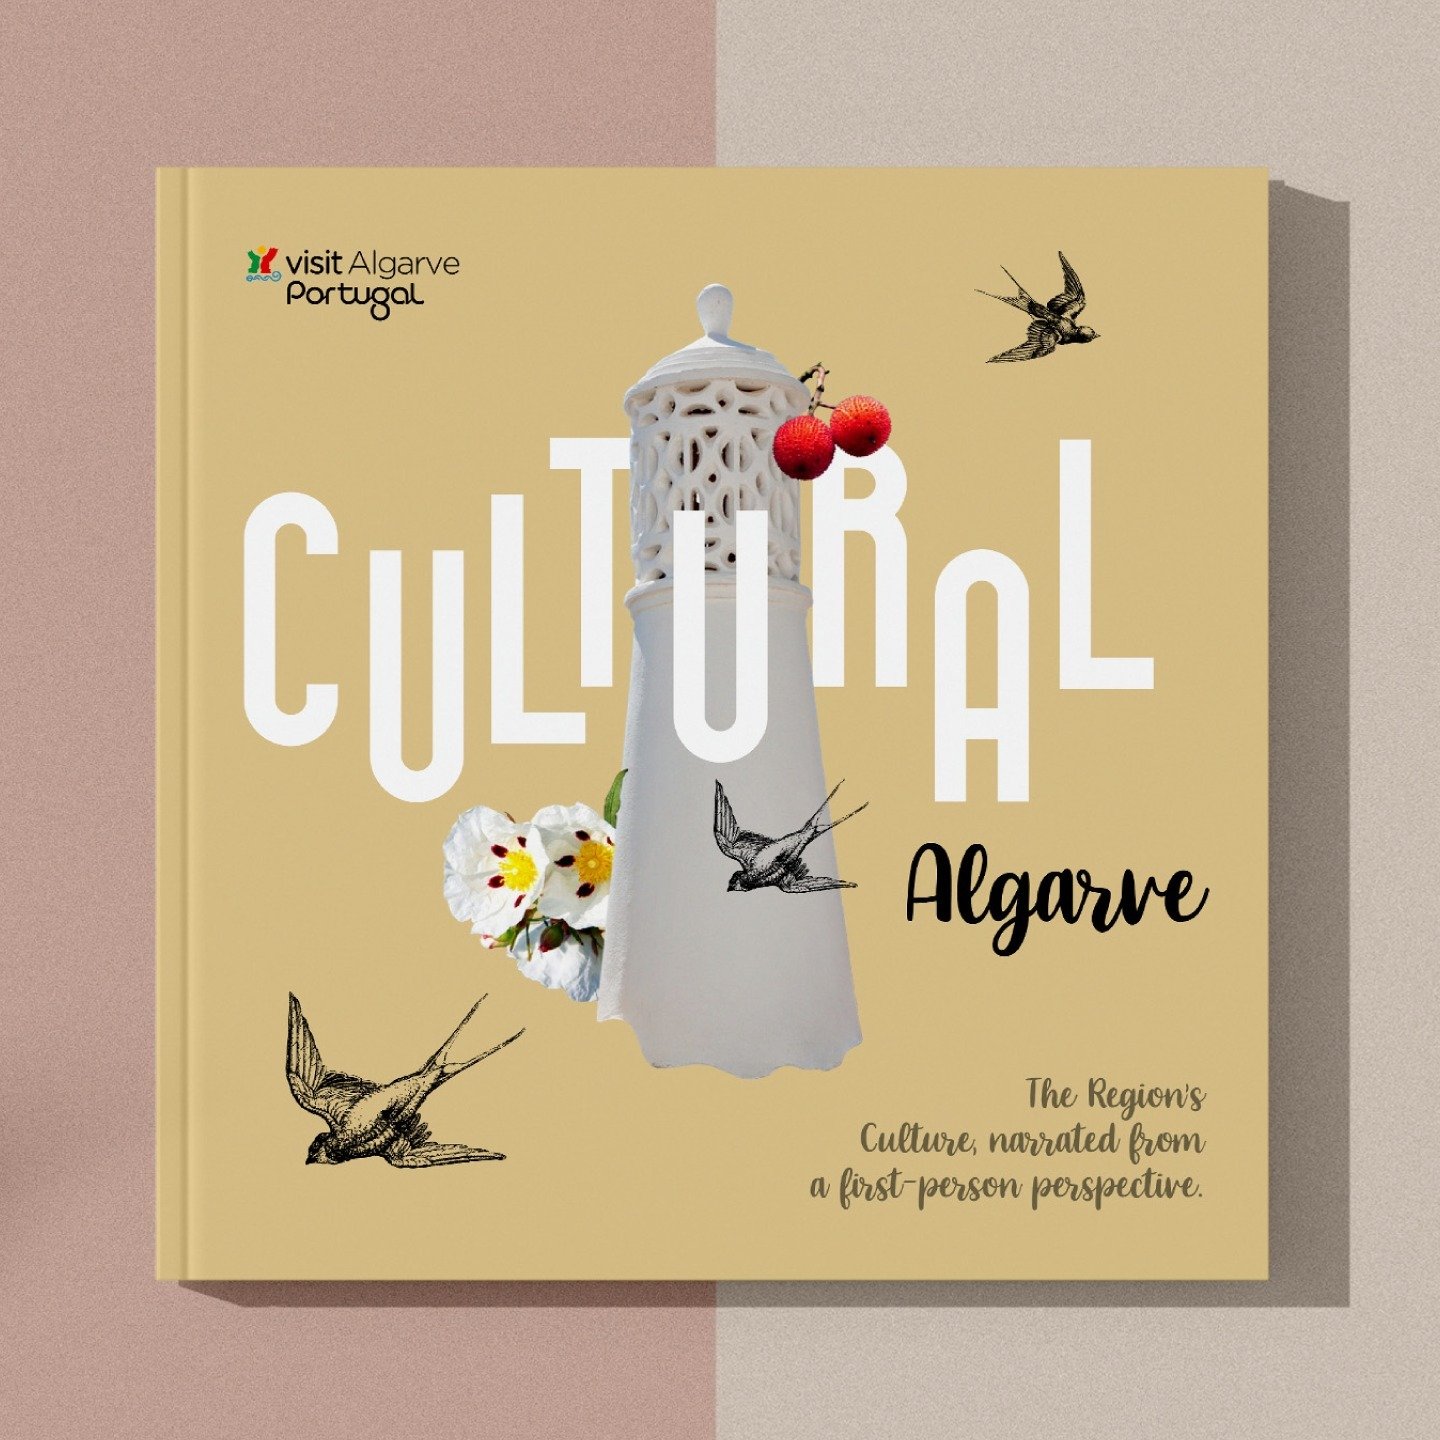 Brochure with conceptual graphics and a differentiated perspective. The piece focuses on various themes related to the Algarve culture, including history, churches, museums, castles and fortresses, festivals and traditions, gastronomy, craftsmanship,